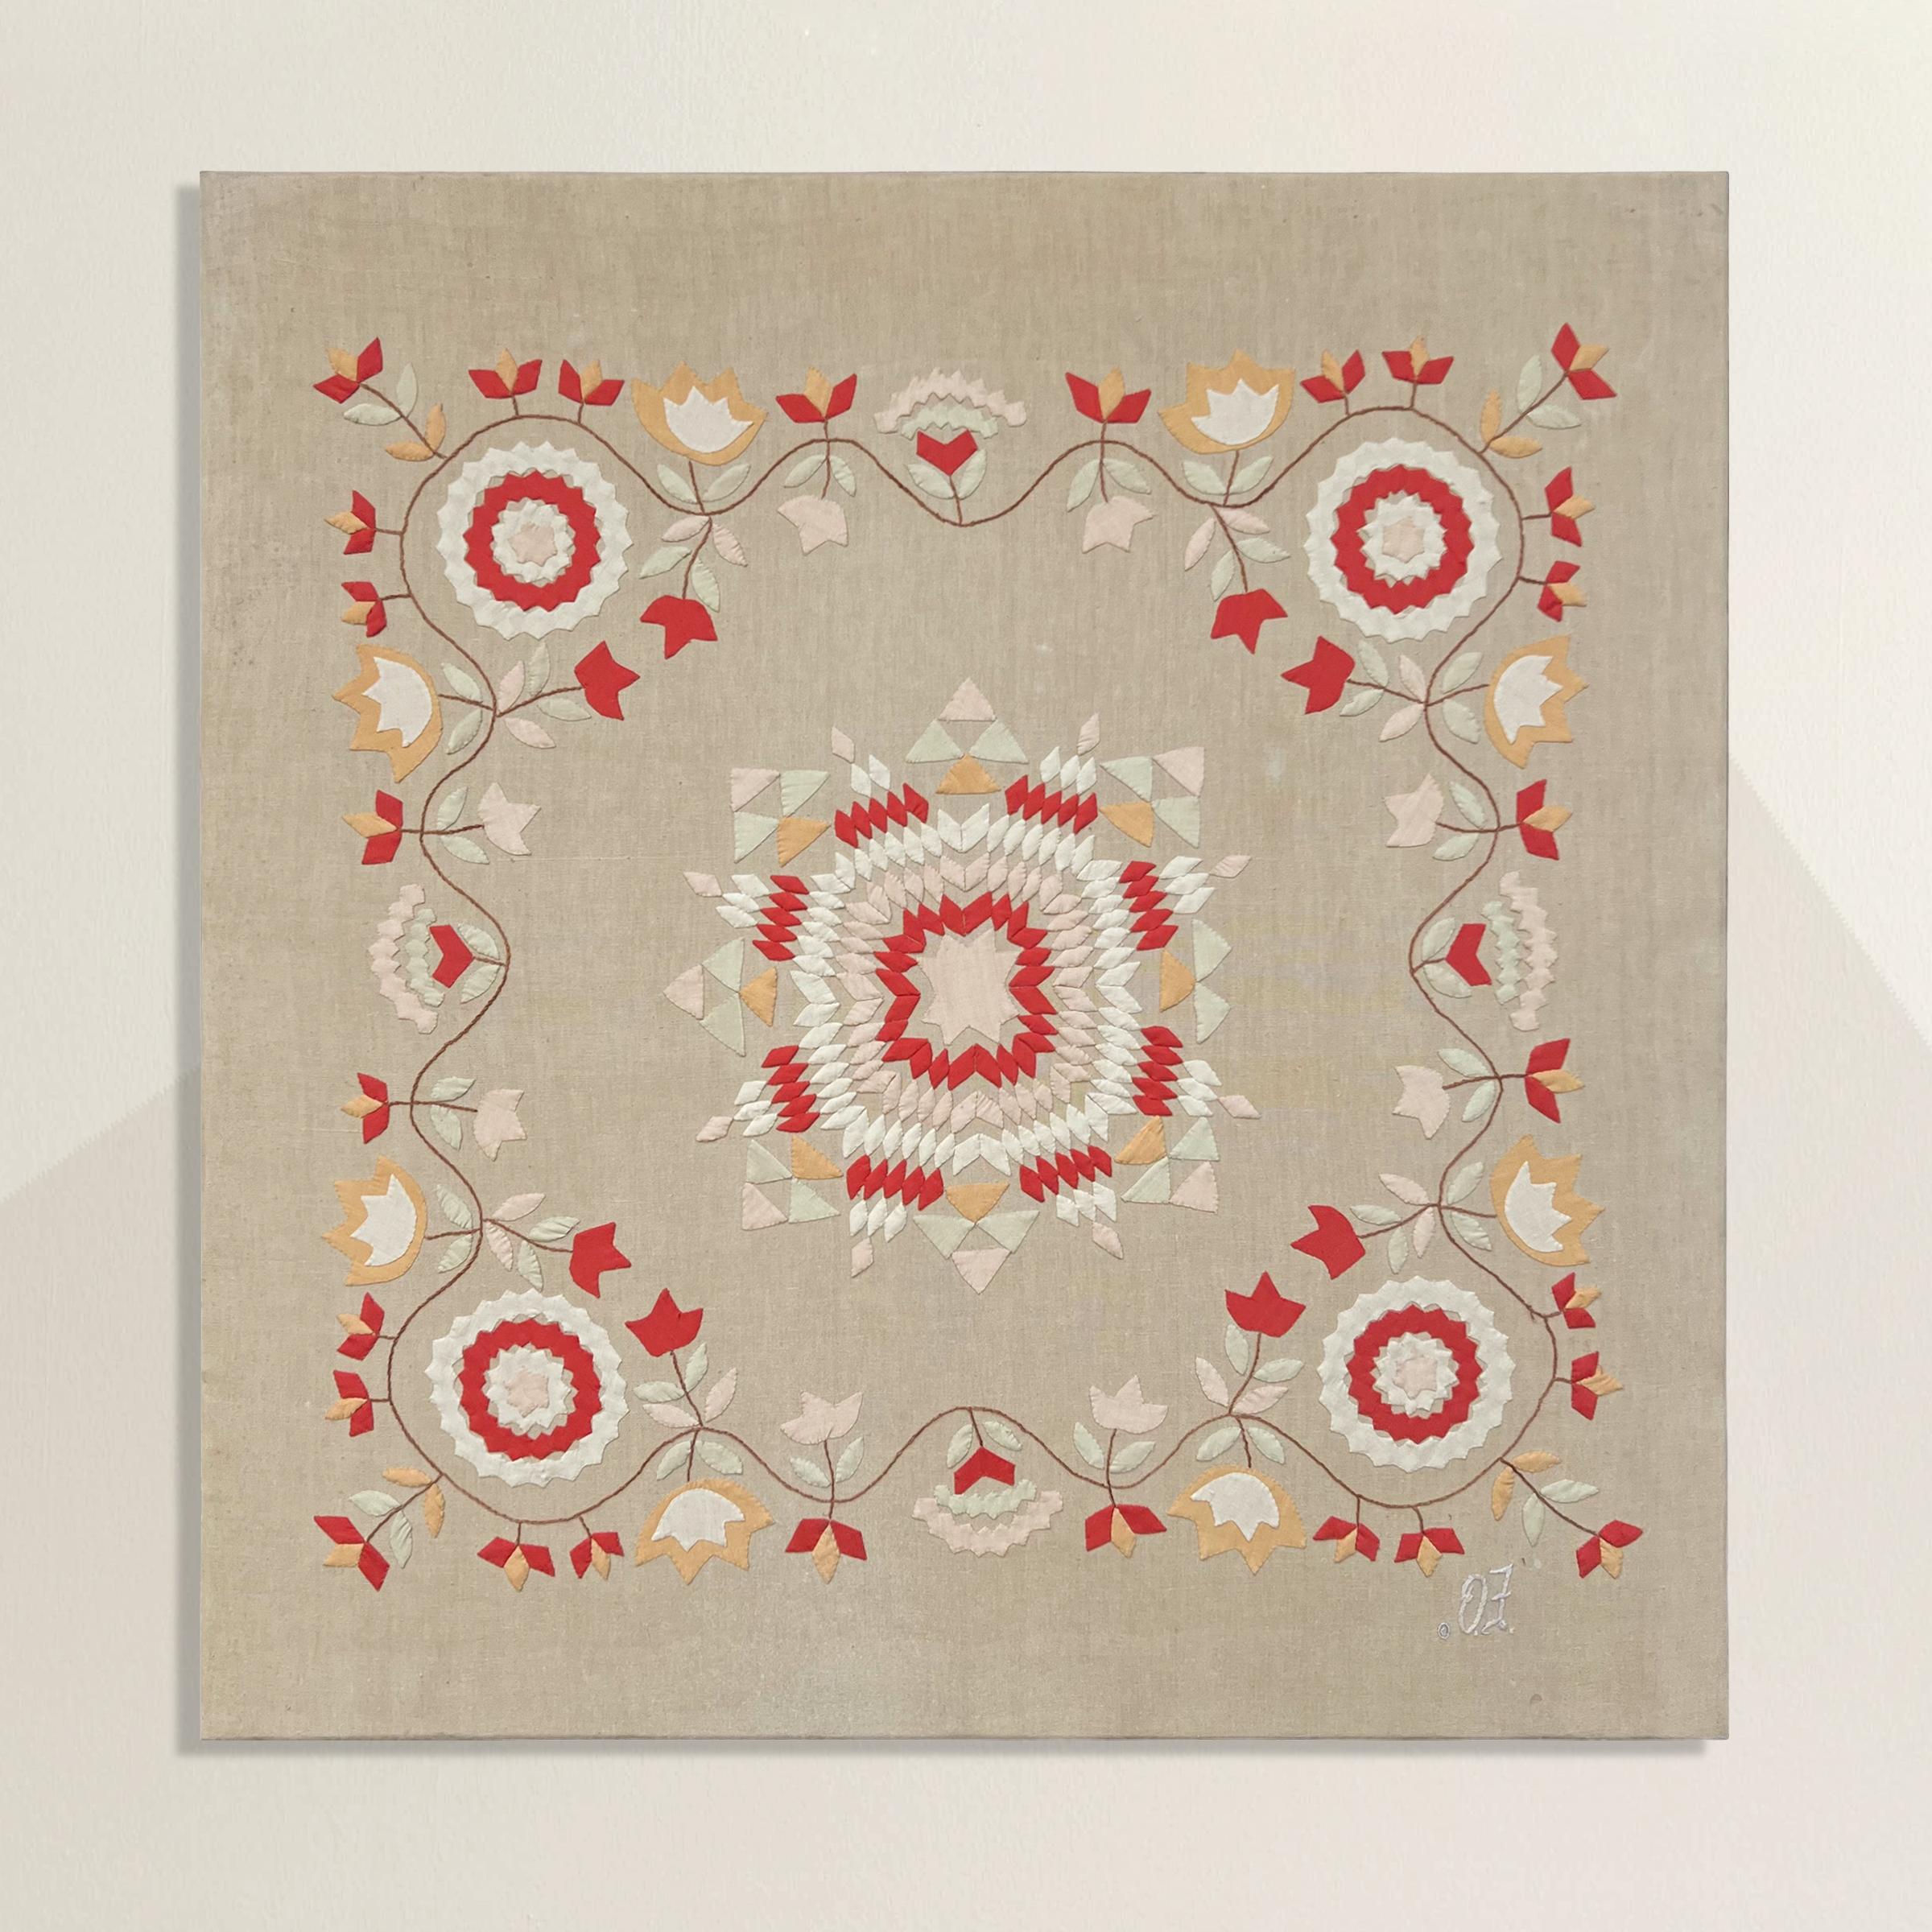 Transport yourself to the late 19th century with this exquisite American appliqué textile, a testament to traditional craftsmanship. At its heart, a captivating eight-point quilt star pattern unfolds in a harmonious dance of crimson, white, pale